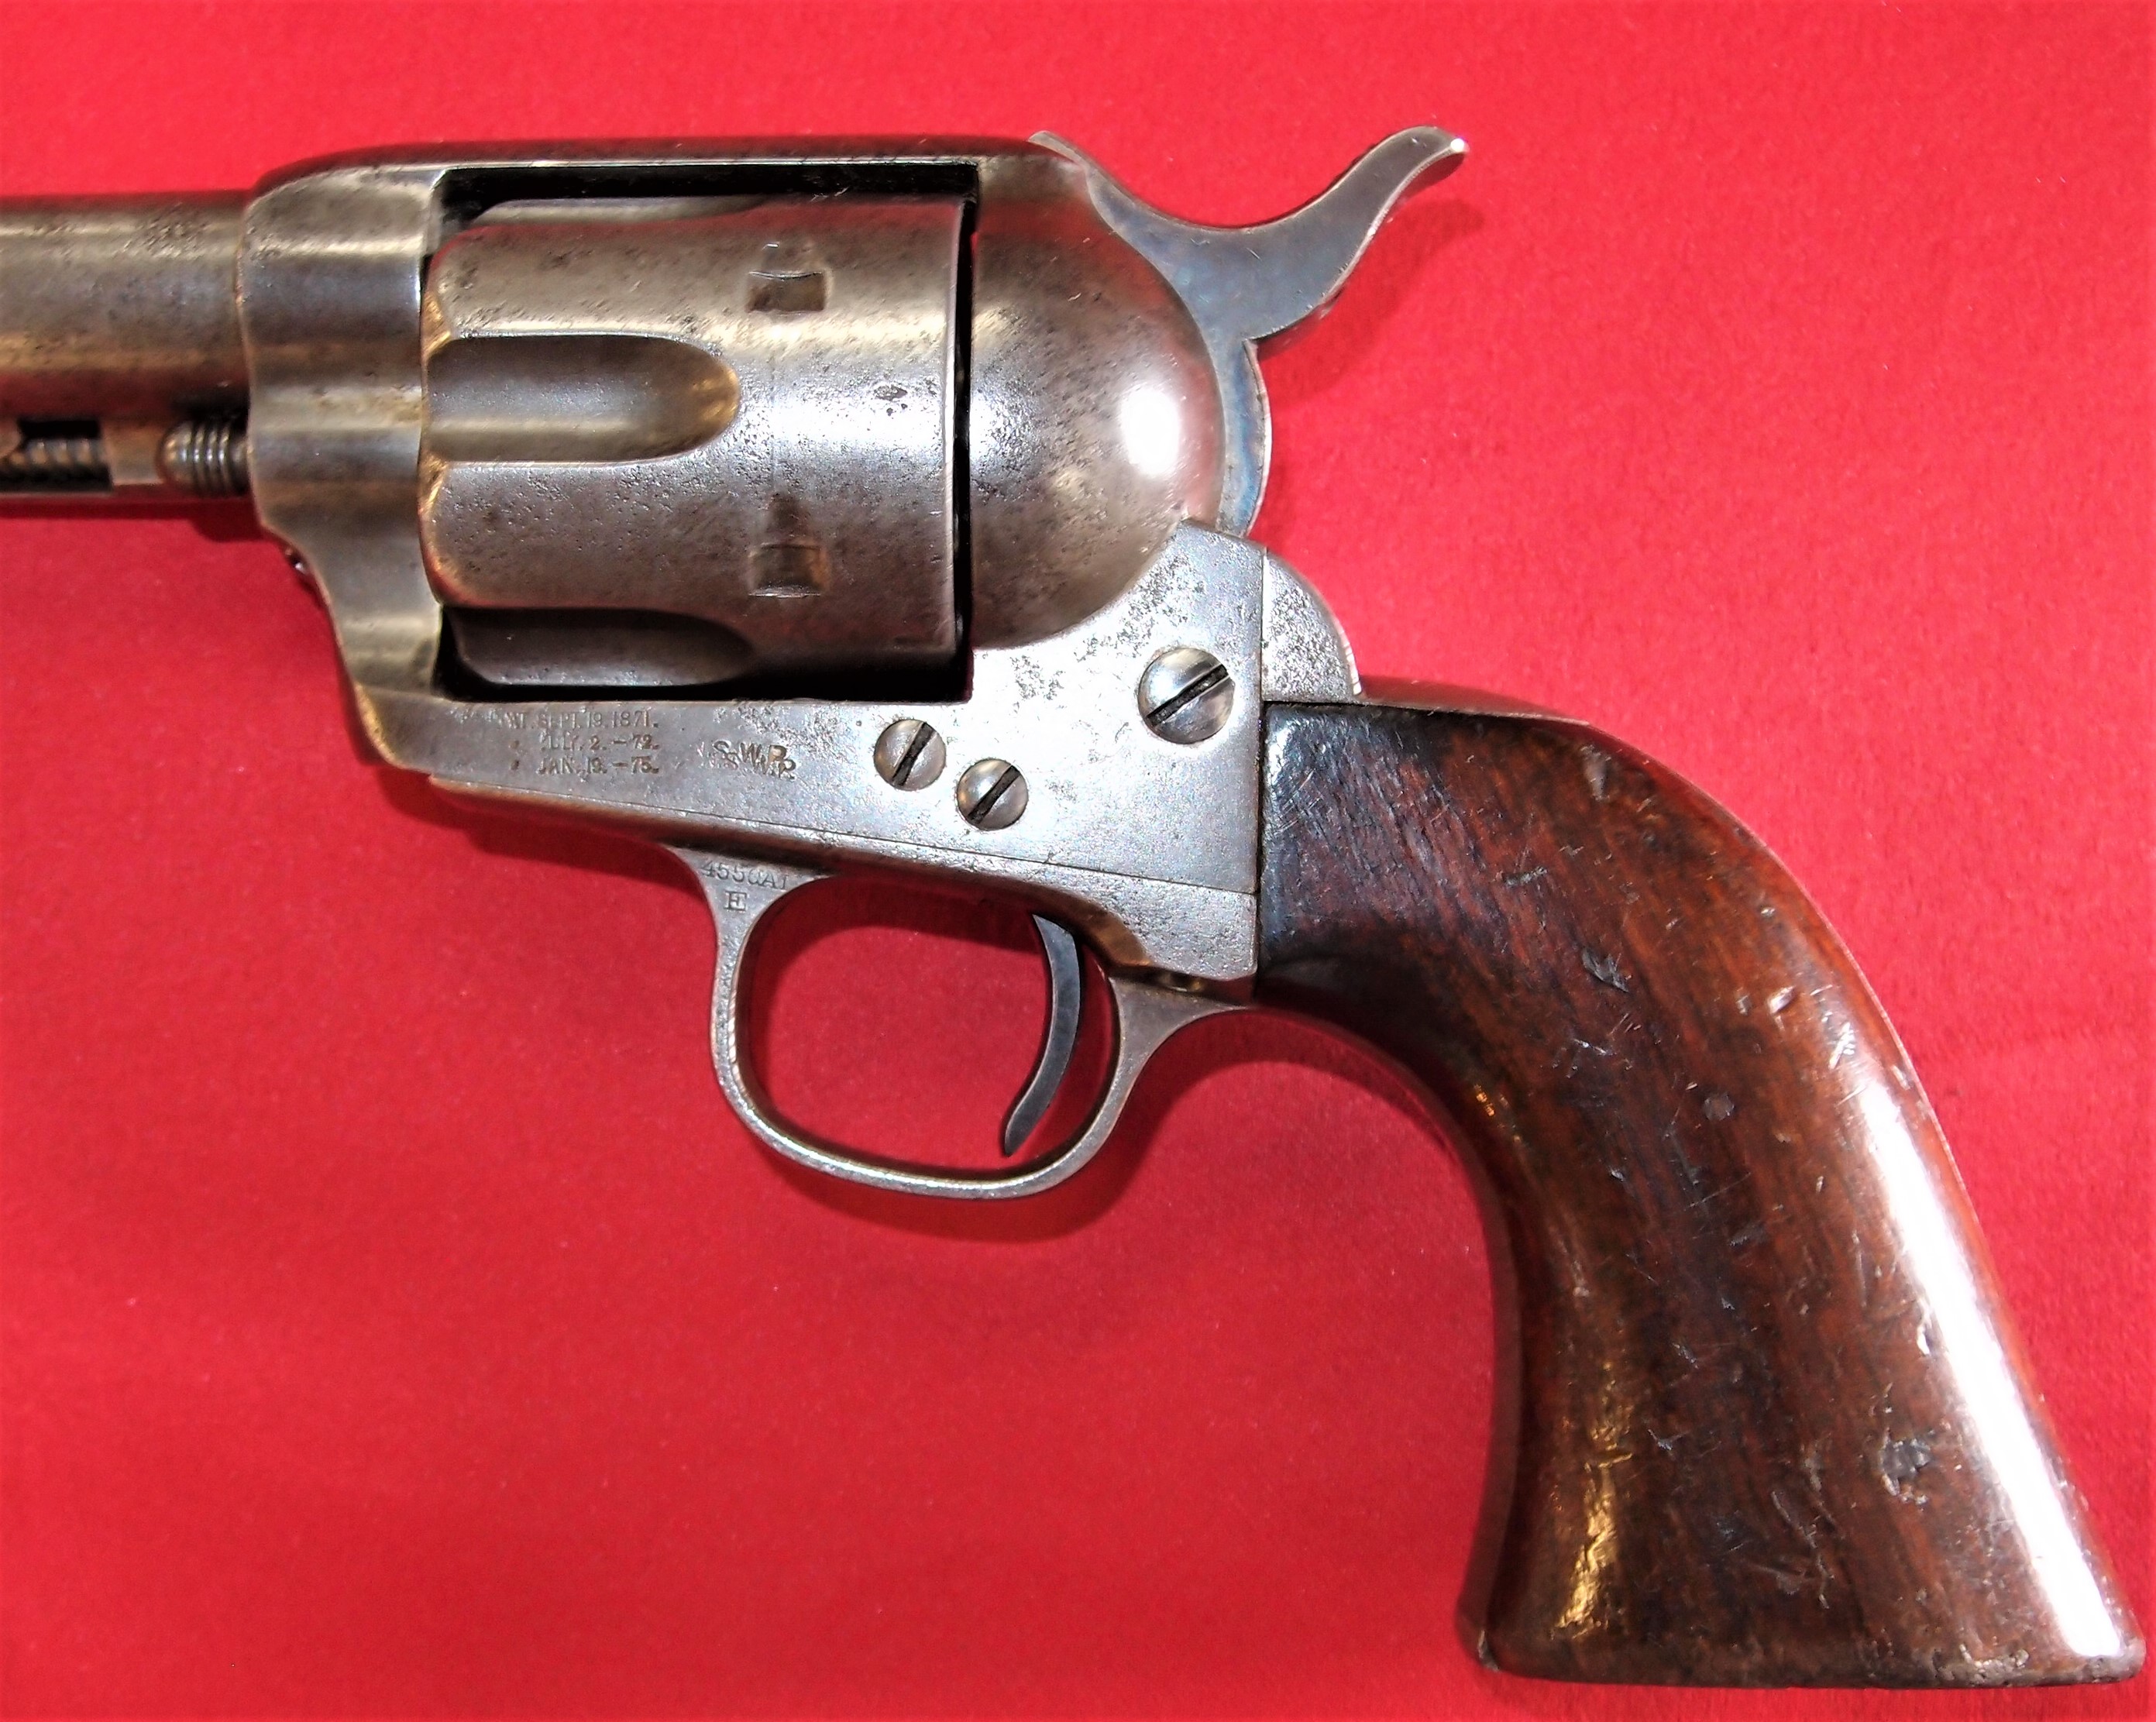 New South Wales Police Colt Single Action revolver